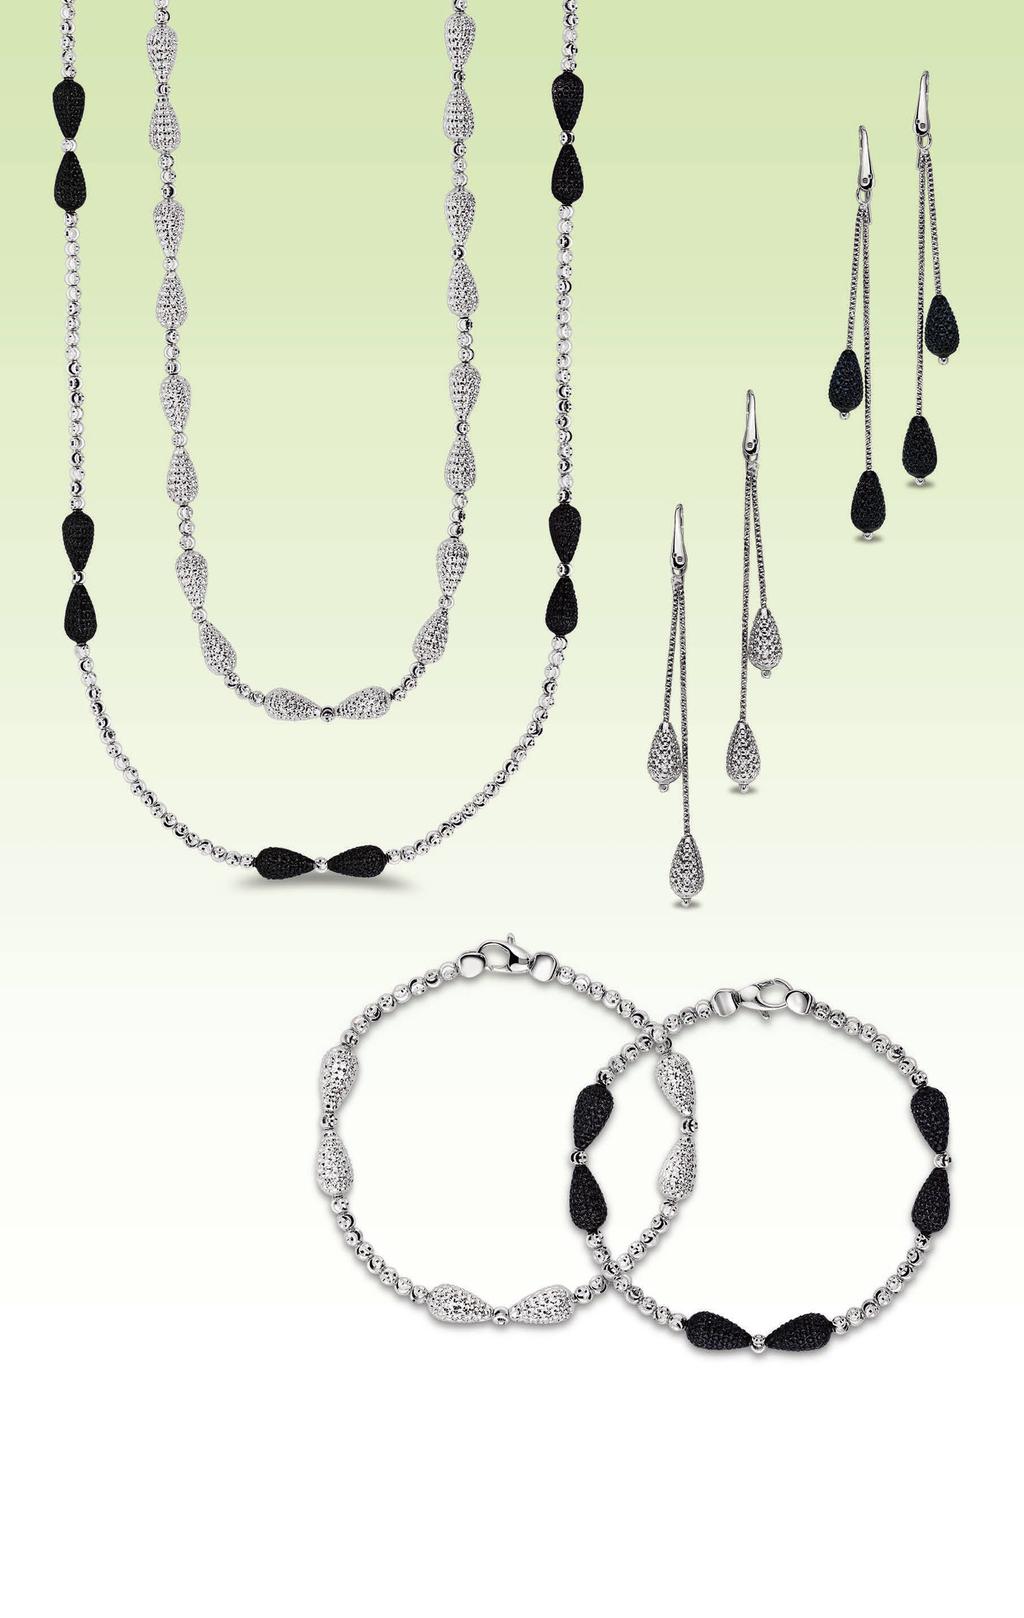 A A. 925 sterling silver, platinum plating, diamond cut bead necklace, 16 + extender, $275. 925 sterling silver, platinum & rhodium plating, diamond cut bead 36 necklace, $385.